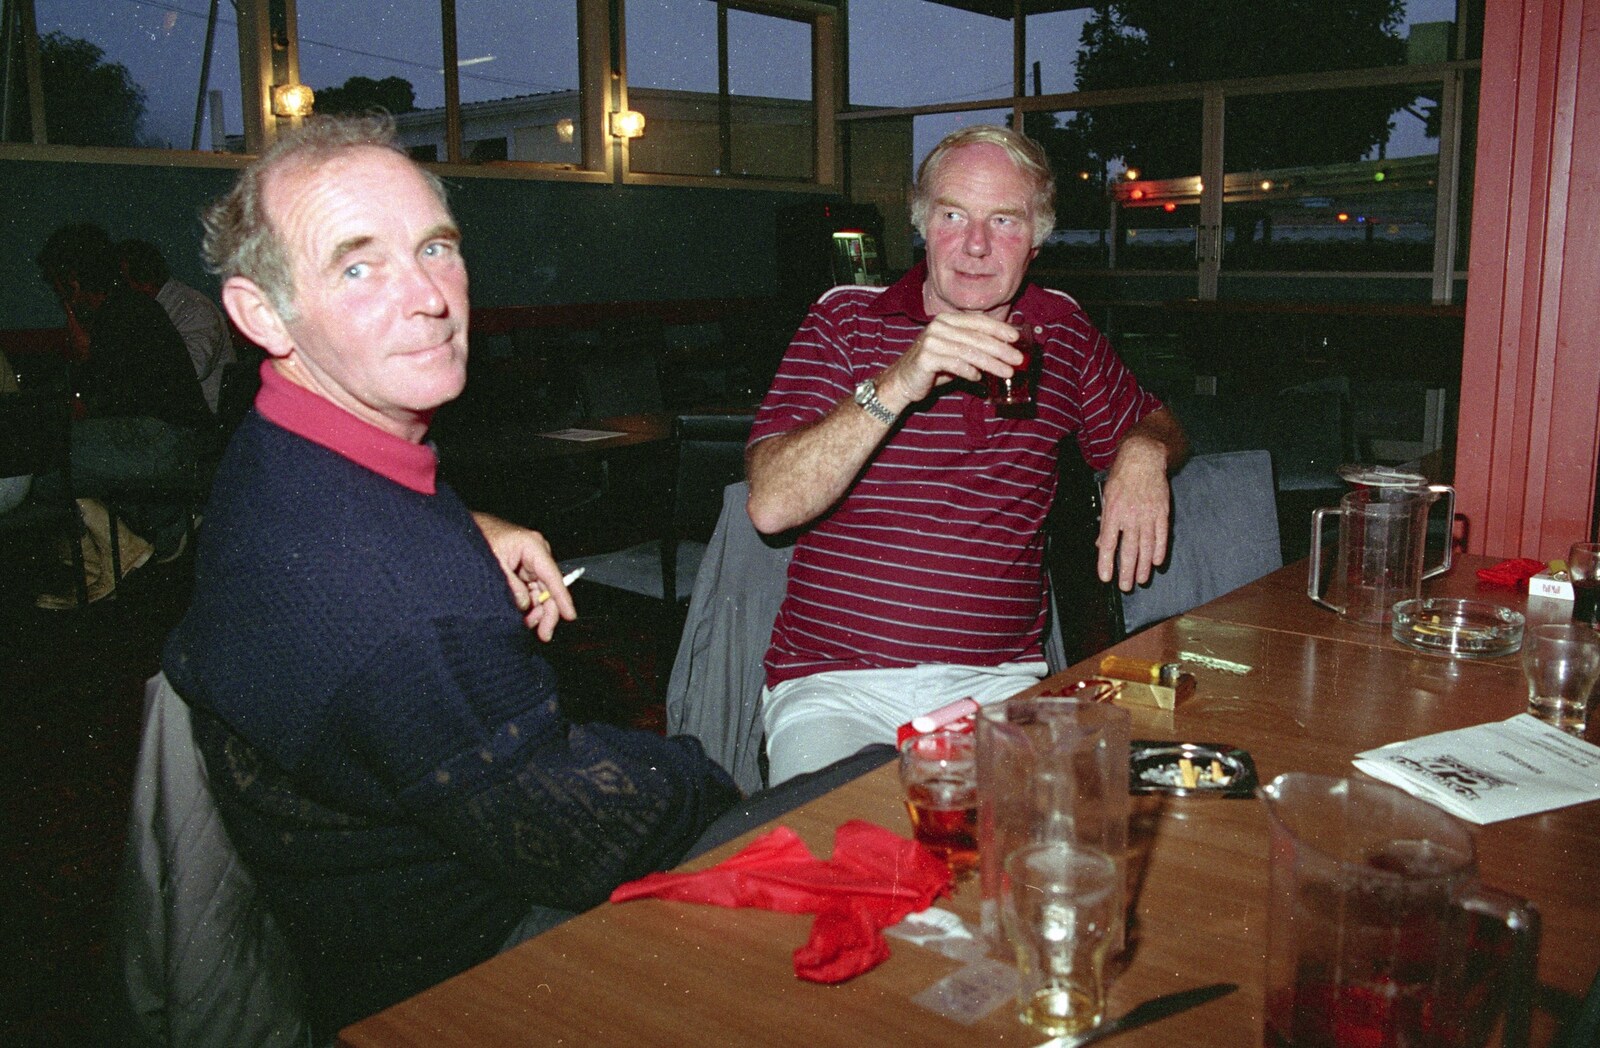 Clive and Trevor from Ferry Landing, Whitianga, New Zealand - 23rd November 1992